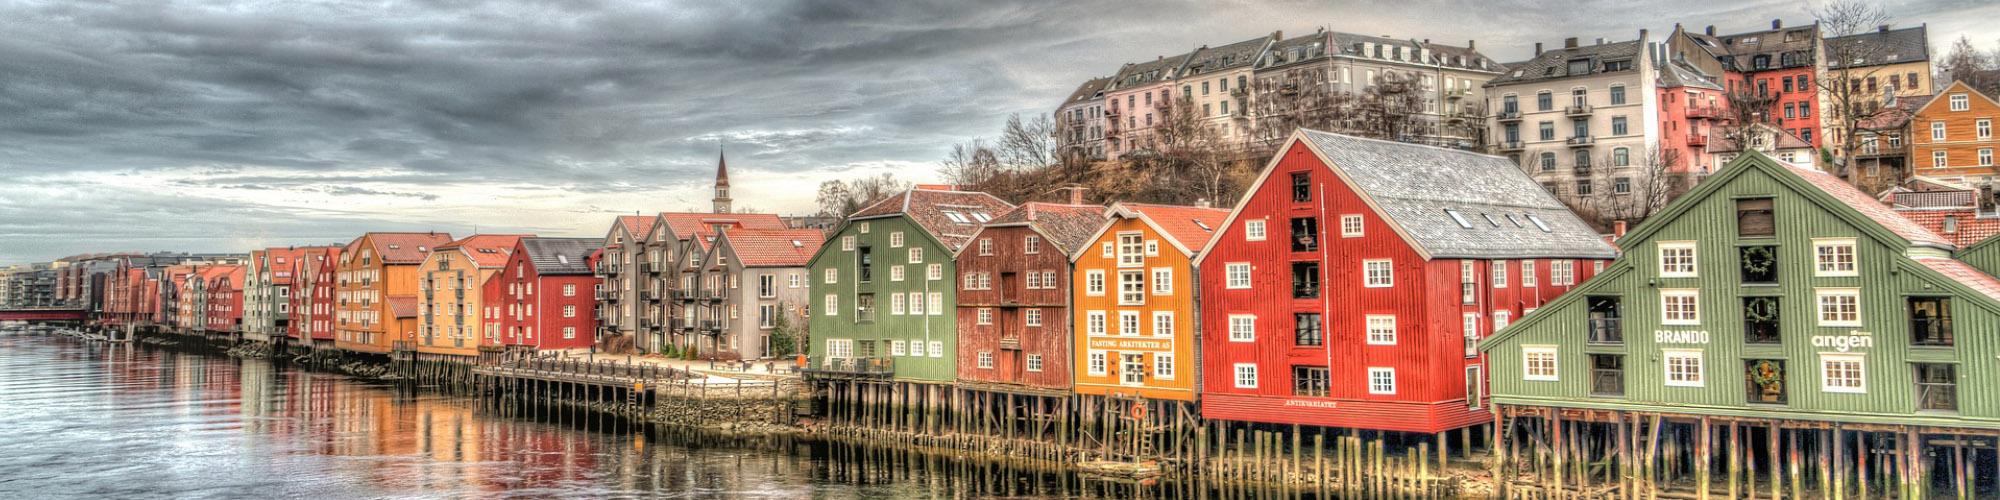 Colored houses in Trondheim Norway